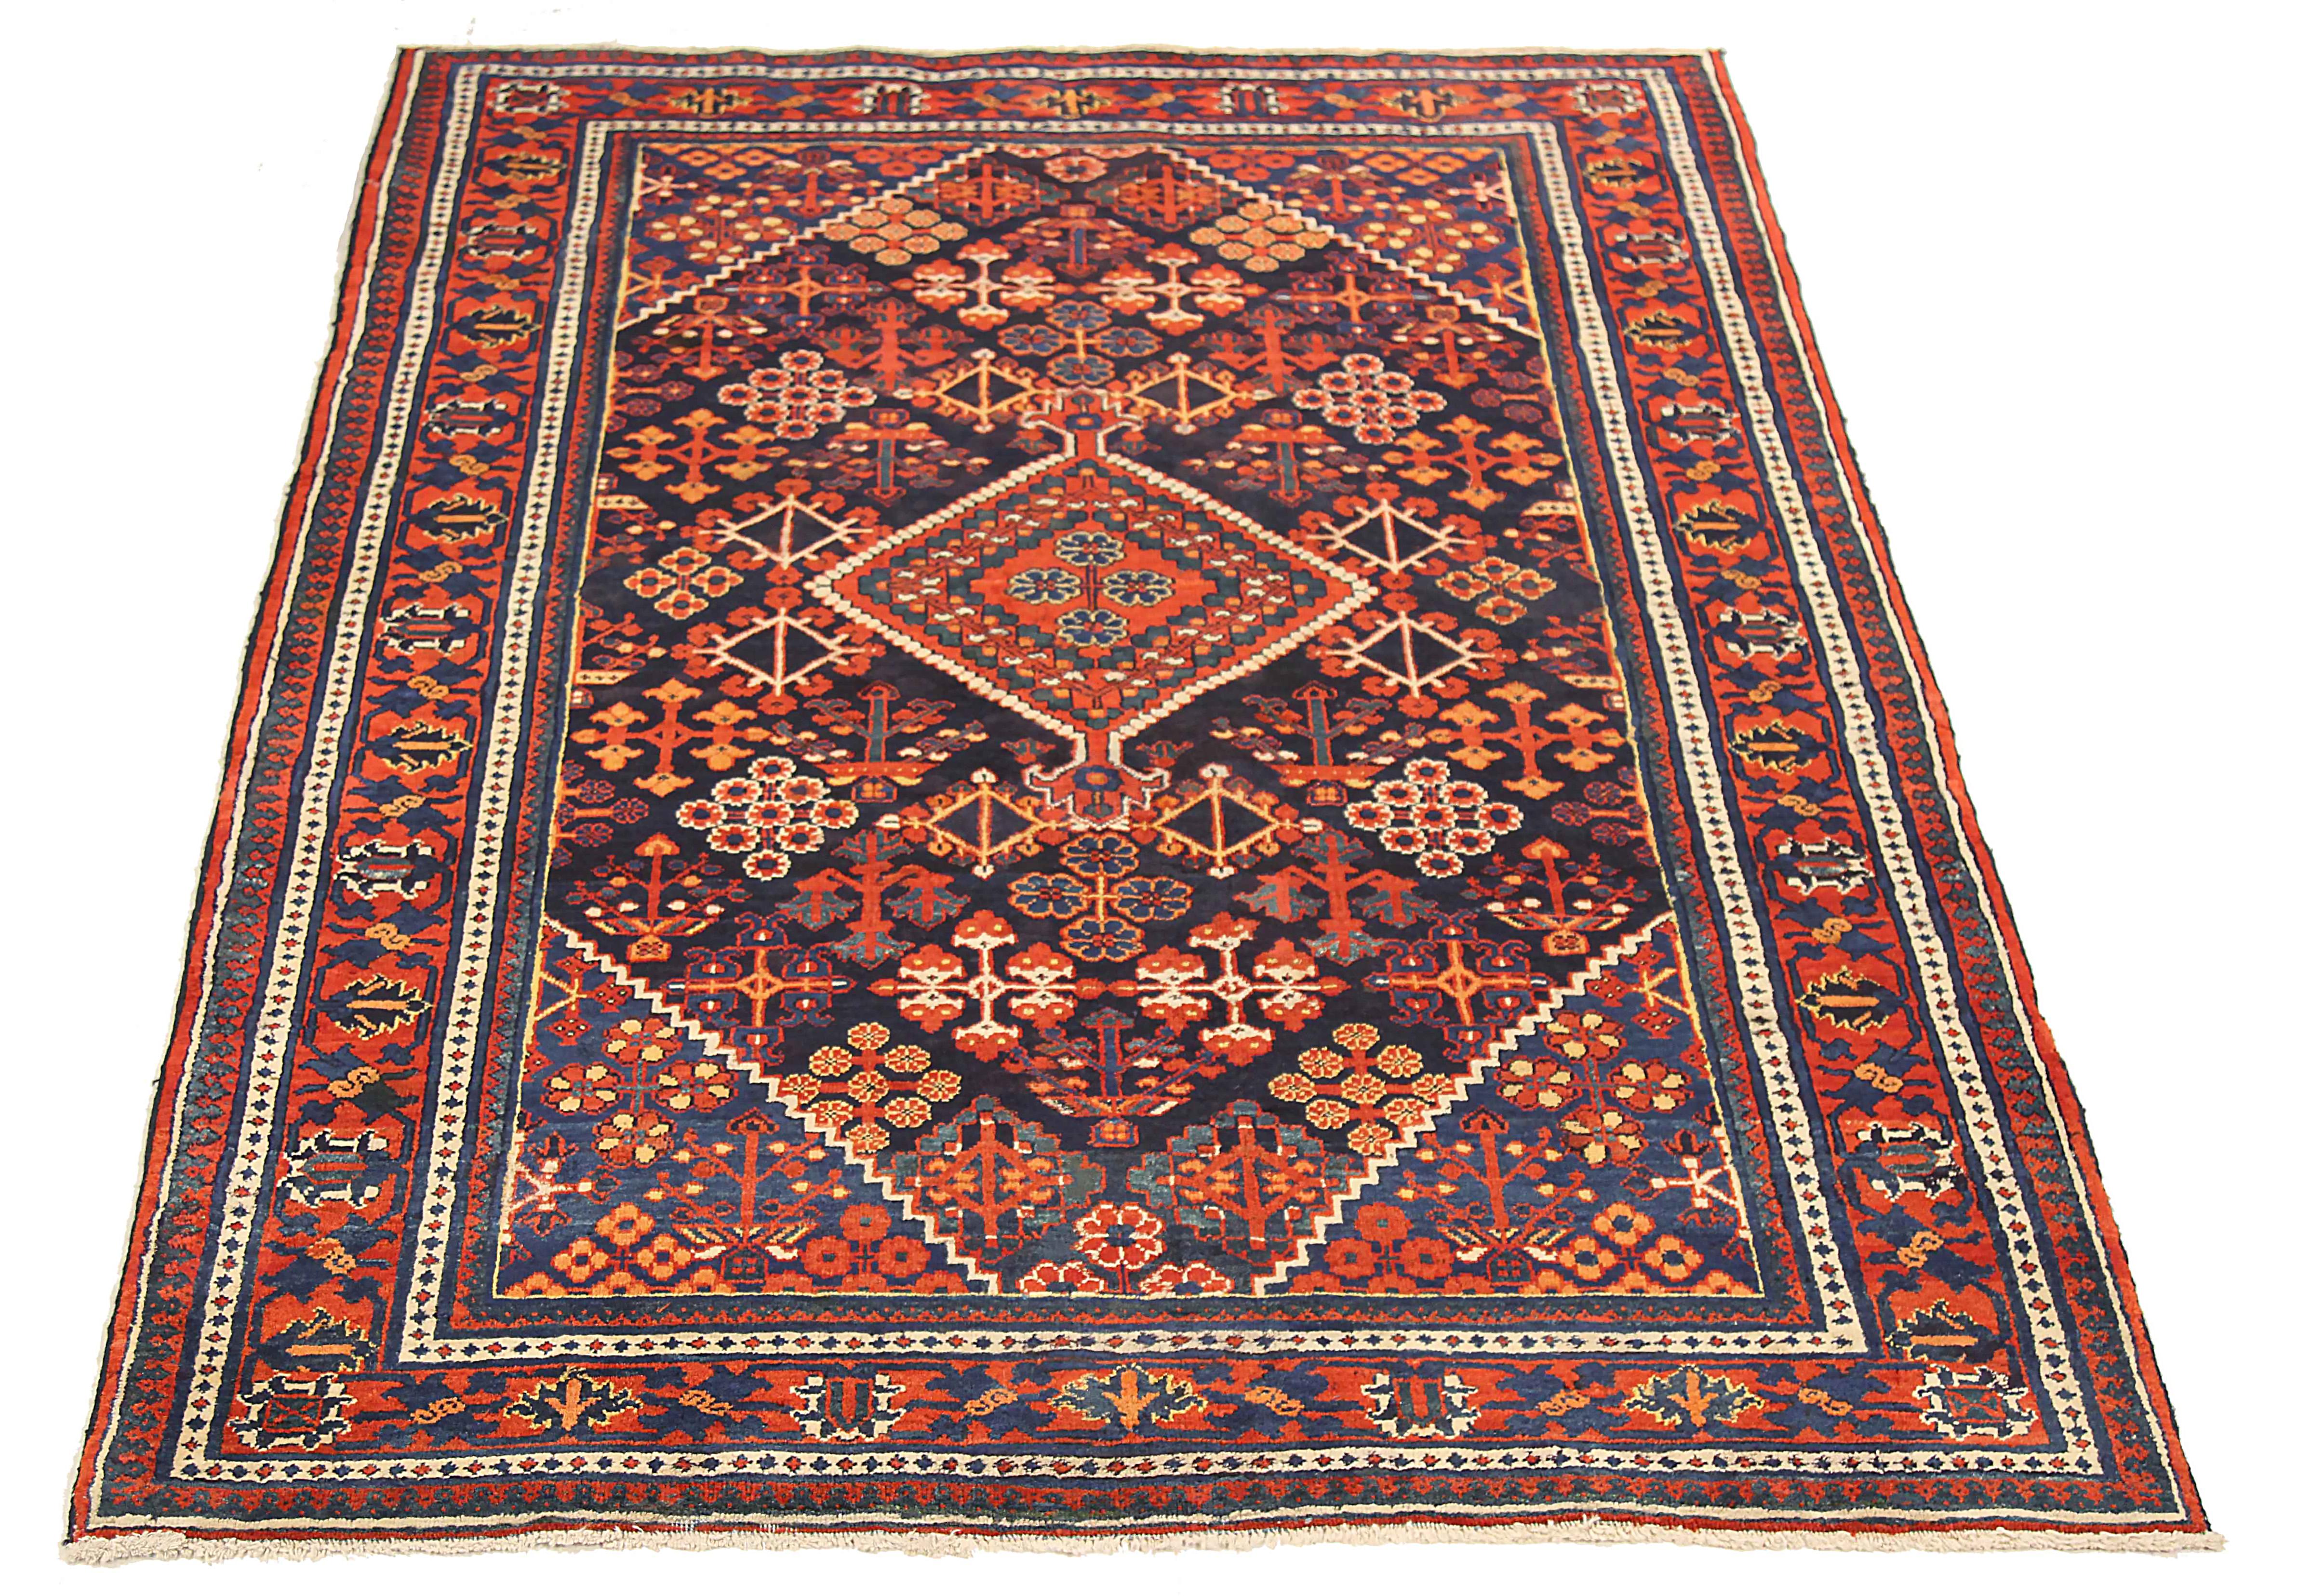 Antique Persian area rug handwoven from the finest sheep’s wool. It’s colored with all-natural vegetable dyes that are safe for humans and pets. It’s a traditional Joshegan design handwoven by expert artisans. It’s a lovely area rug that can be